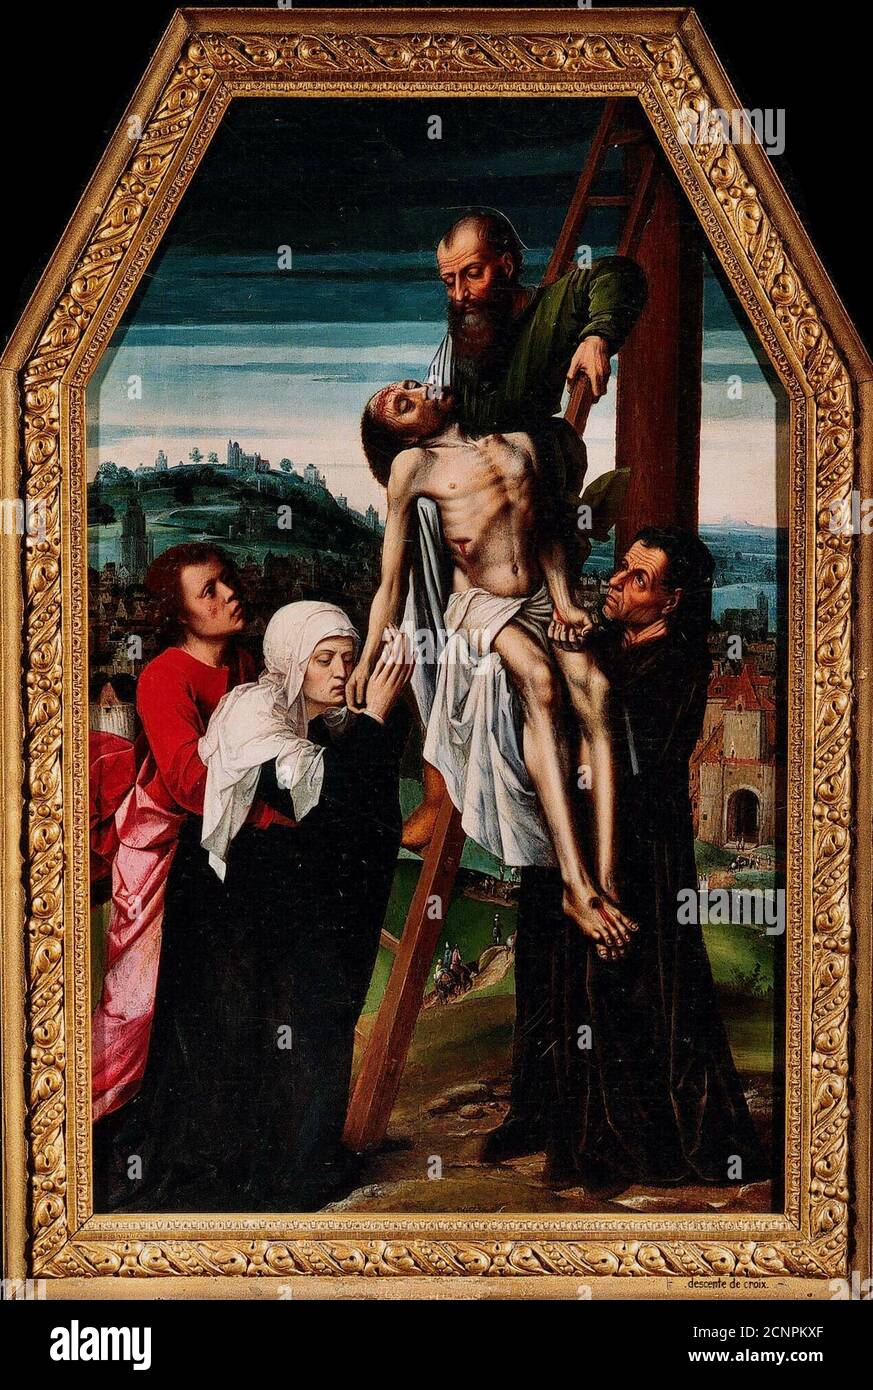 The Descent from the Cross, 1528. Found in the collection of Mus&#xe9;e des Beaux-Arts, Li&#xe8;ge. Stock Photo